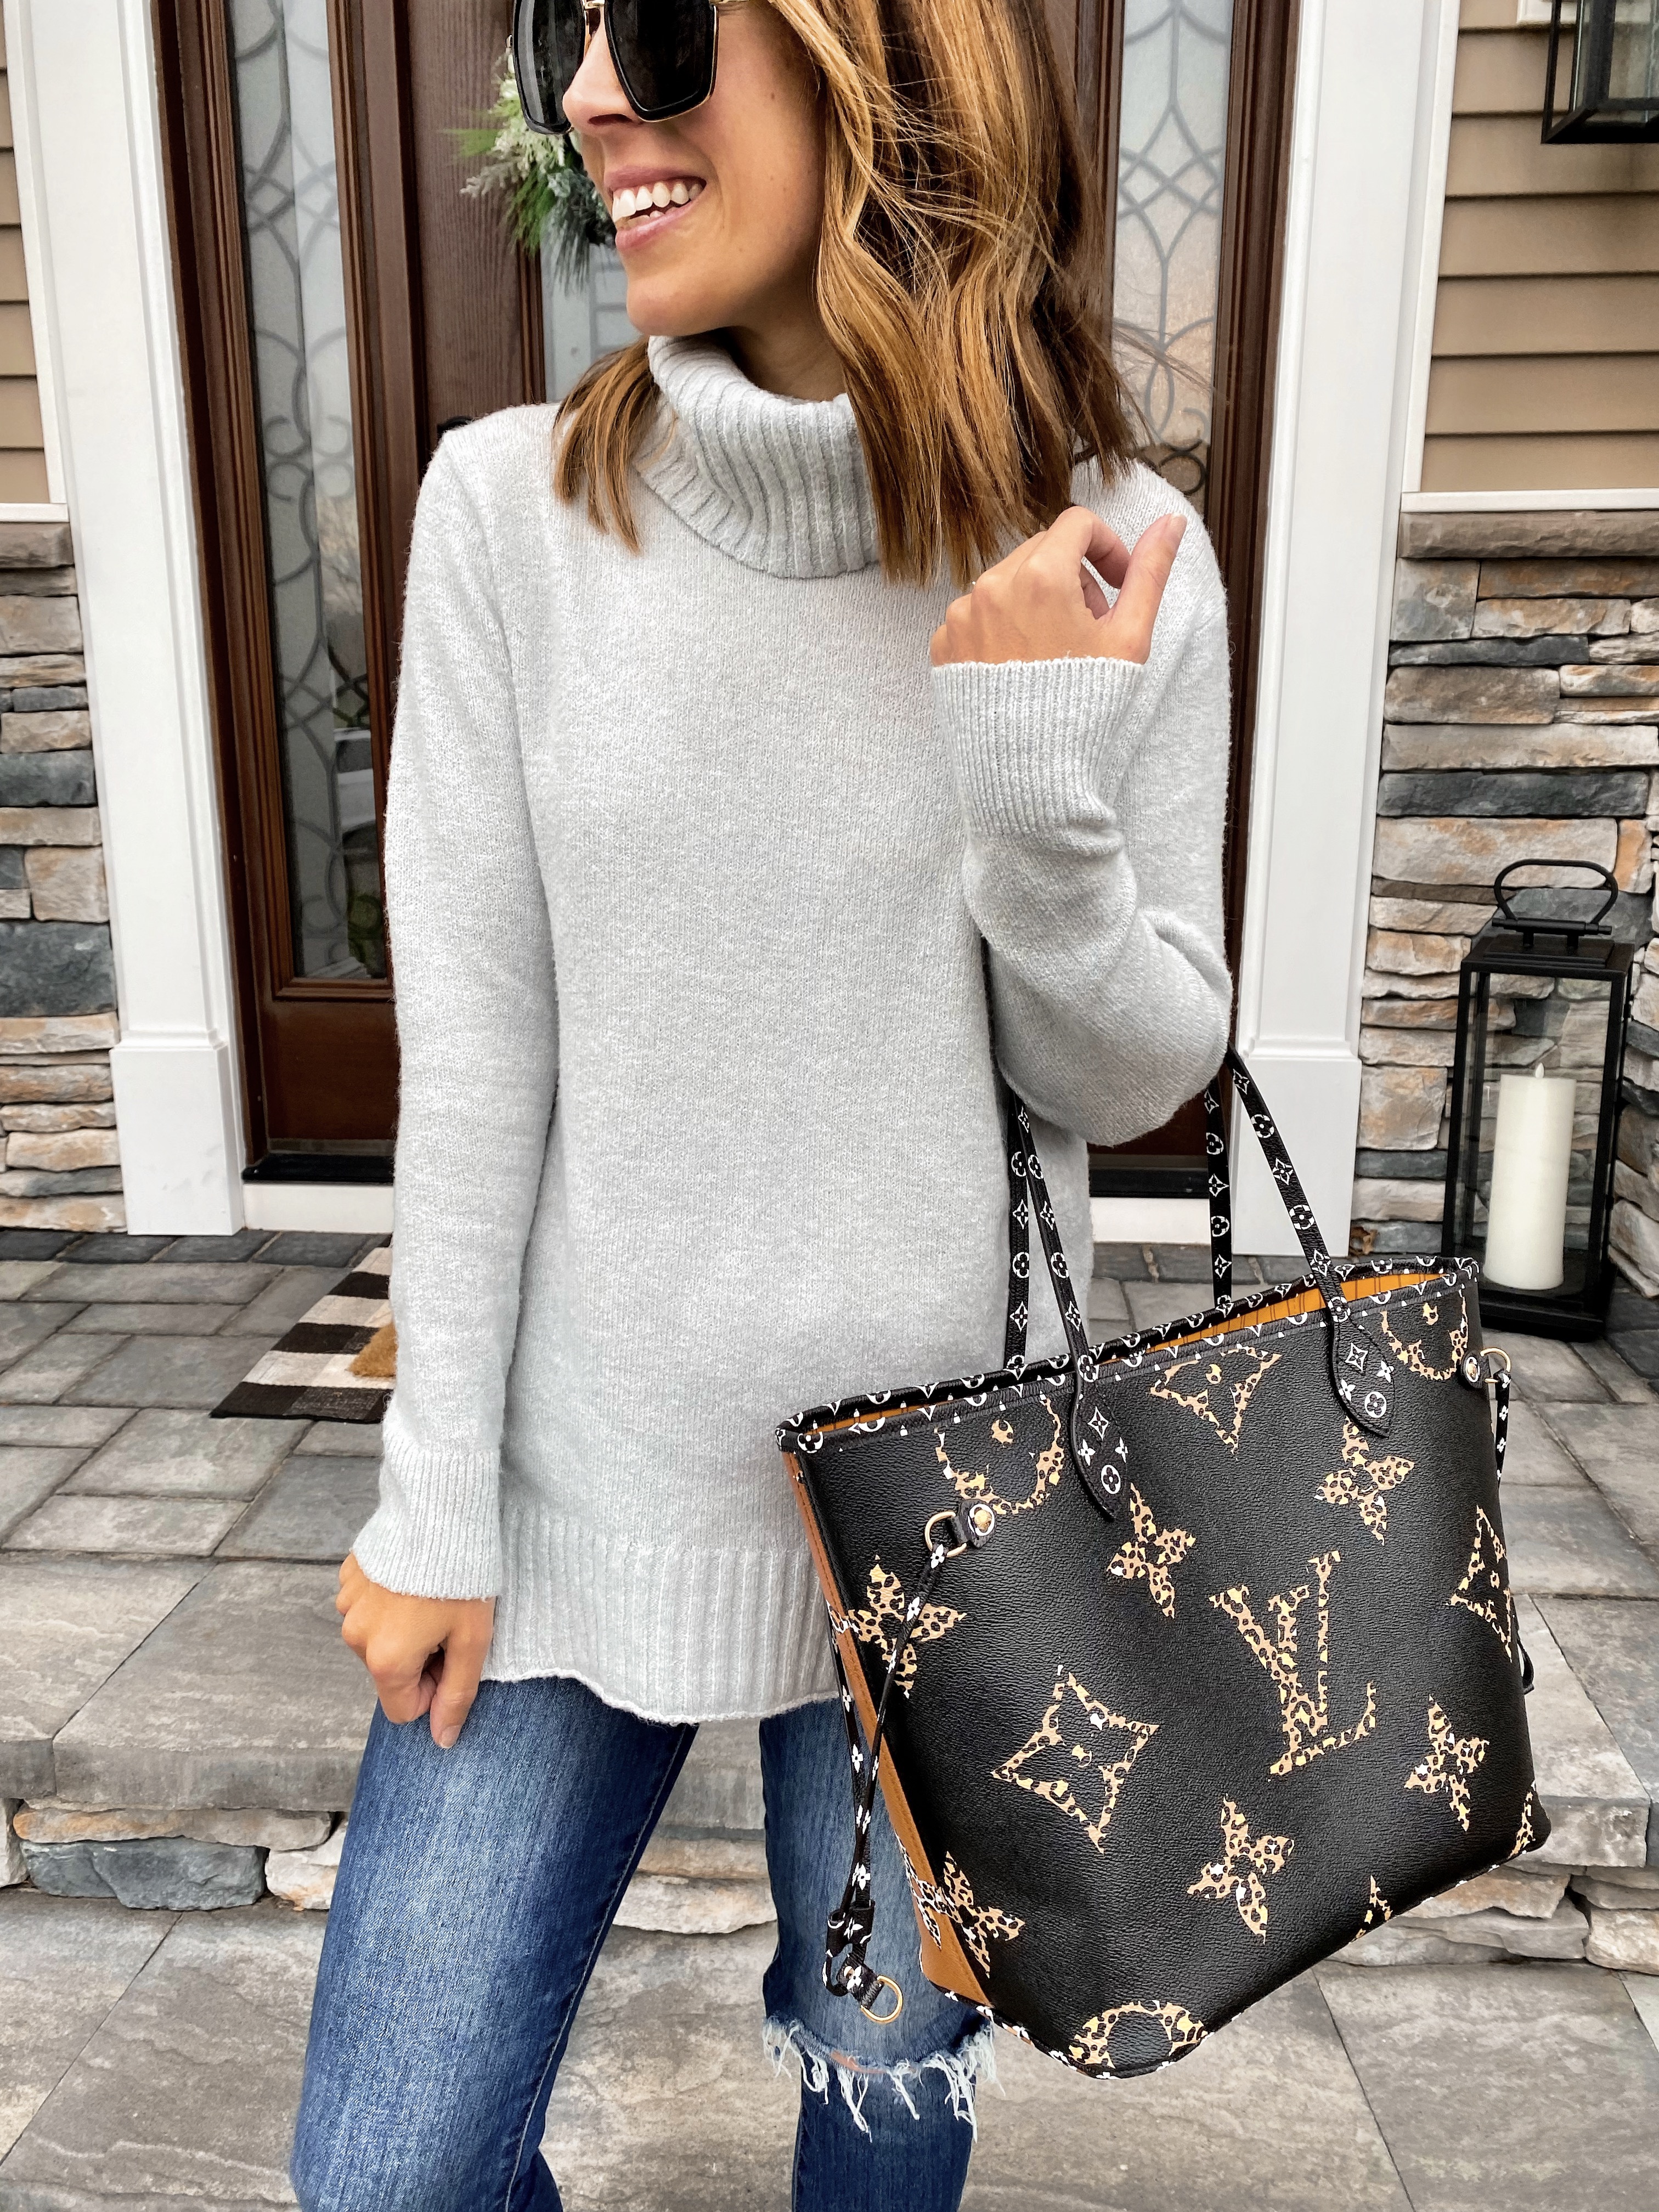 Trust Me! You'll LOVE this $39 Sweater..